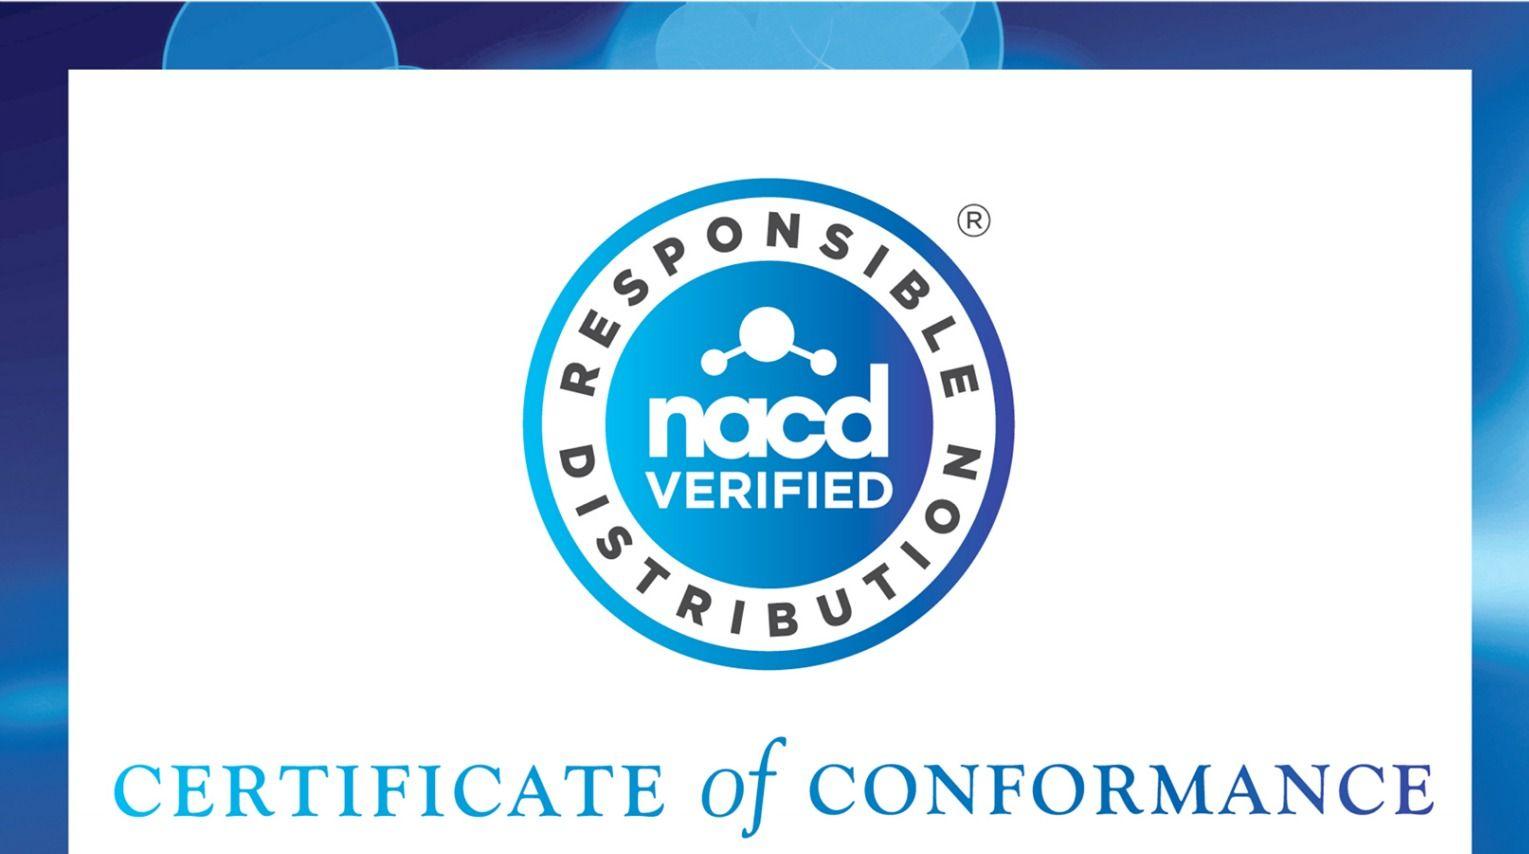 NACD Logo - Seacole Verified in NACD Responsible Distribution